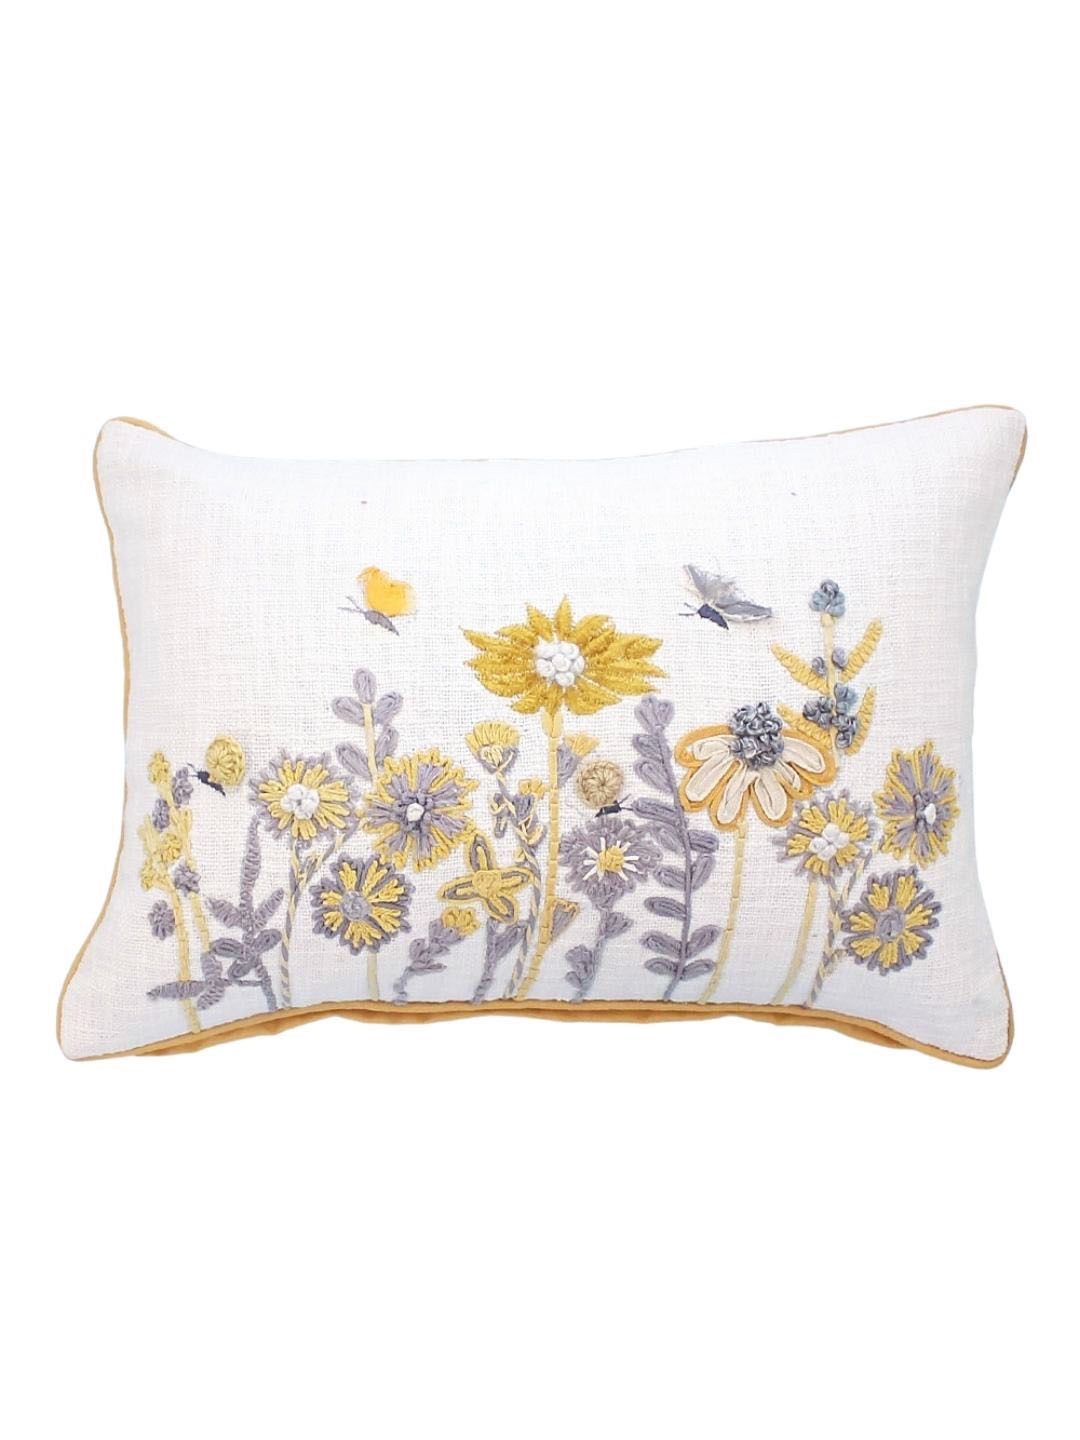 The Wishing Chair White & Yellow Square Cushion Covers Price in India